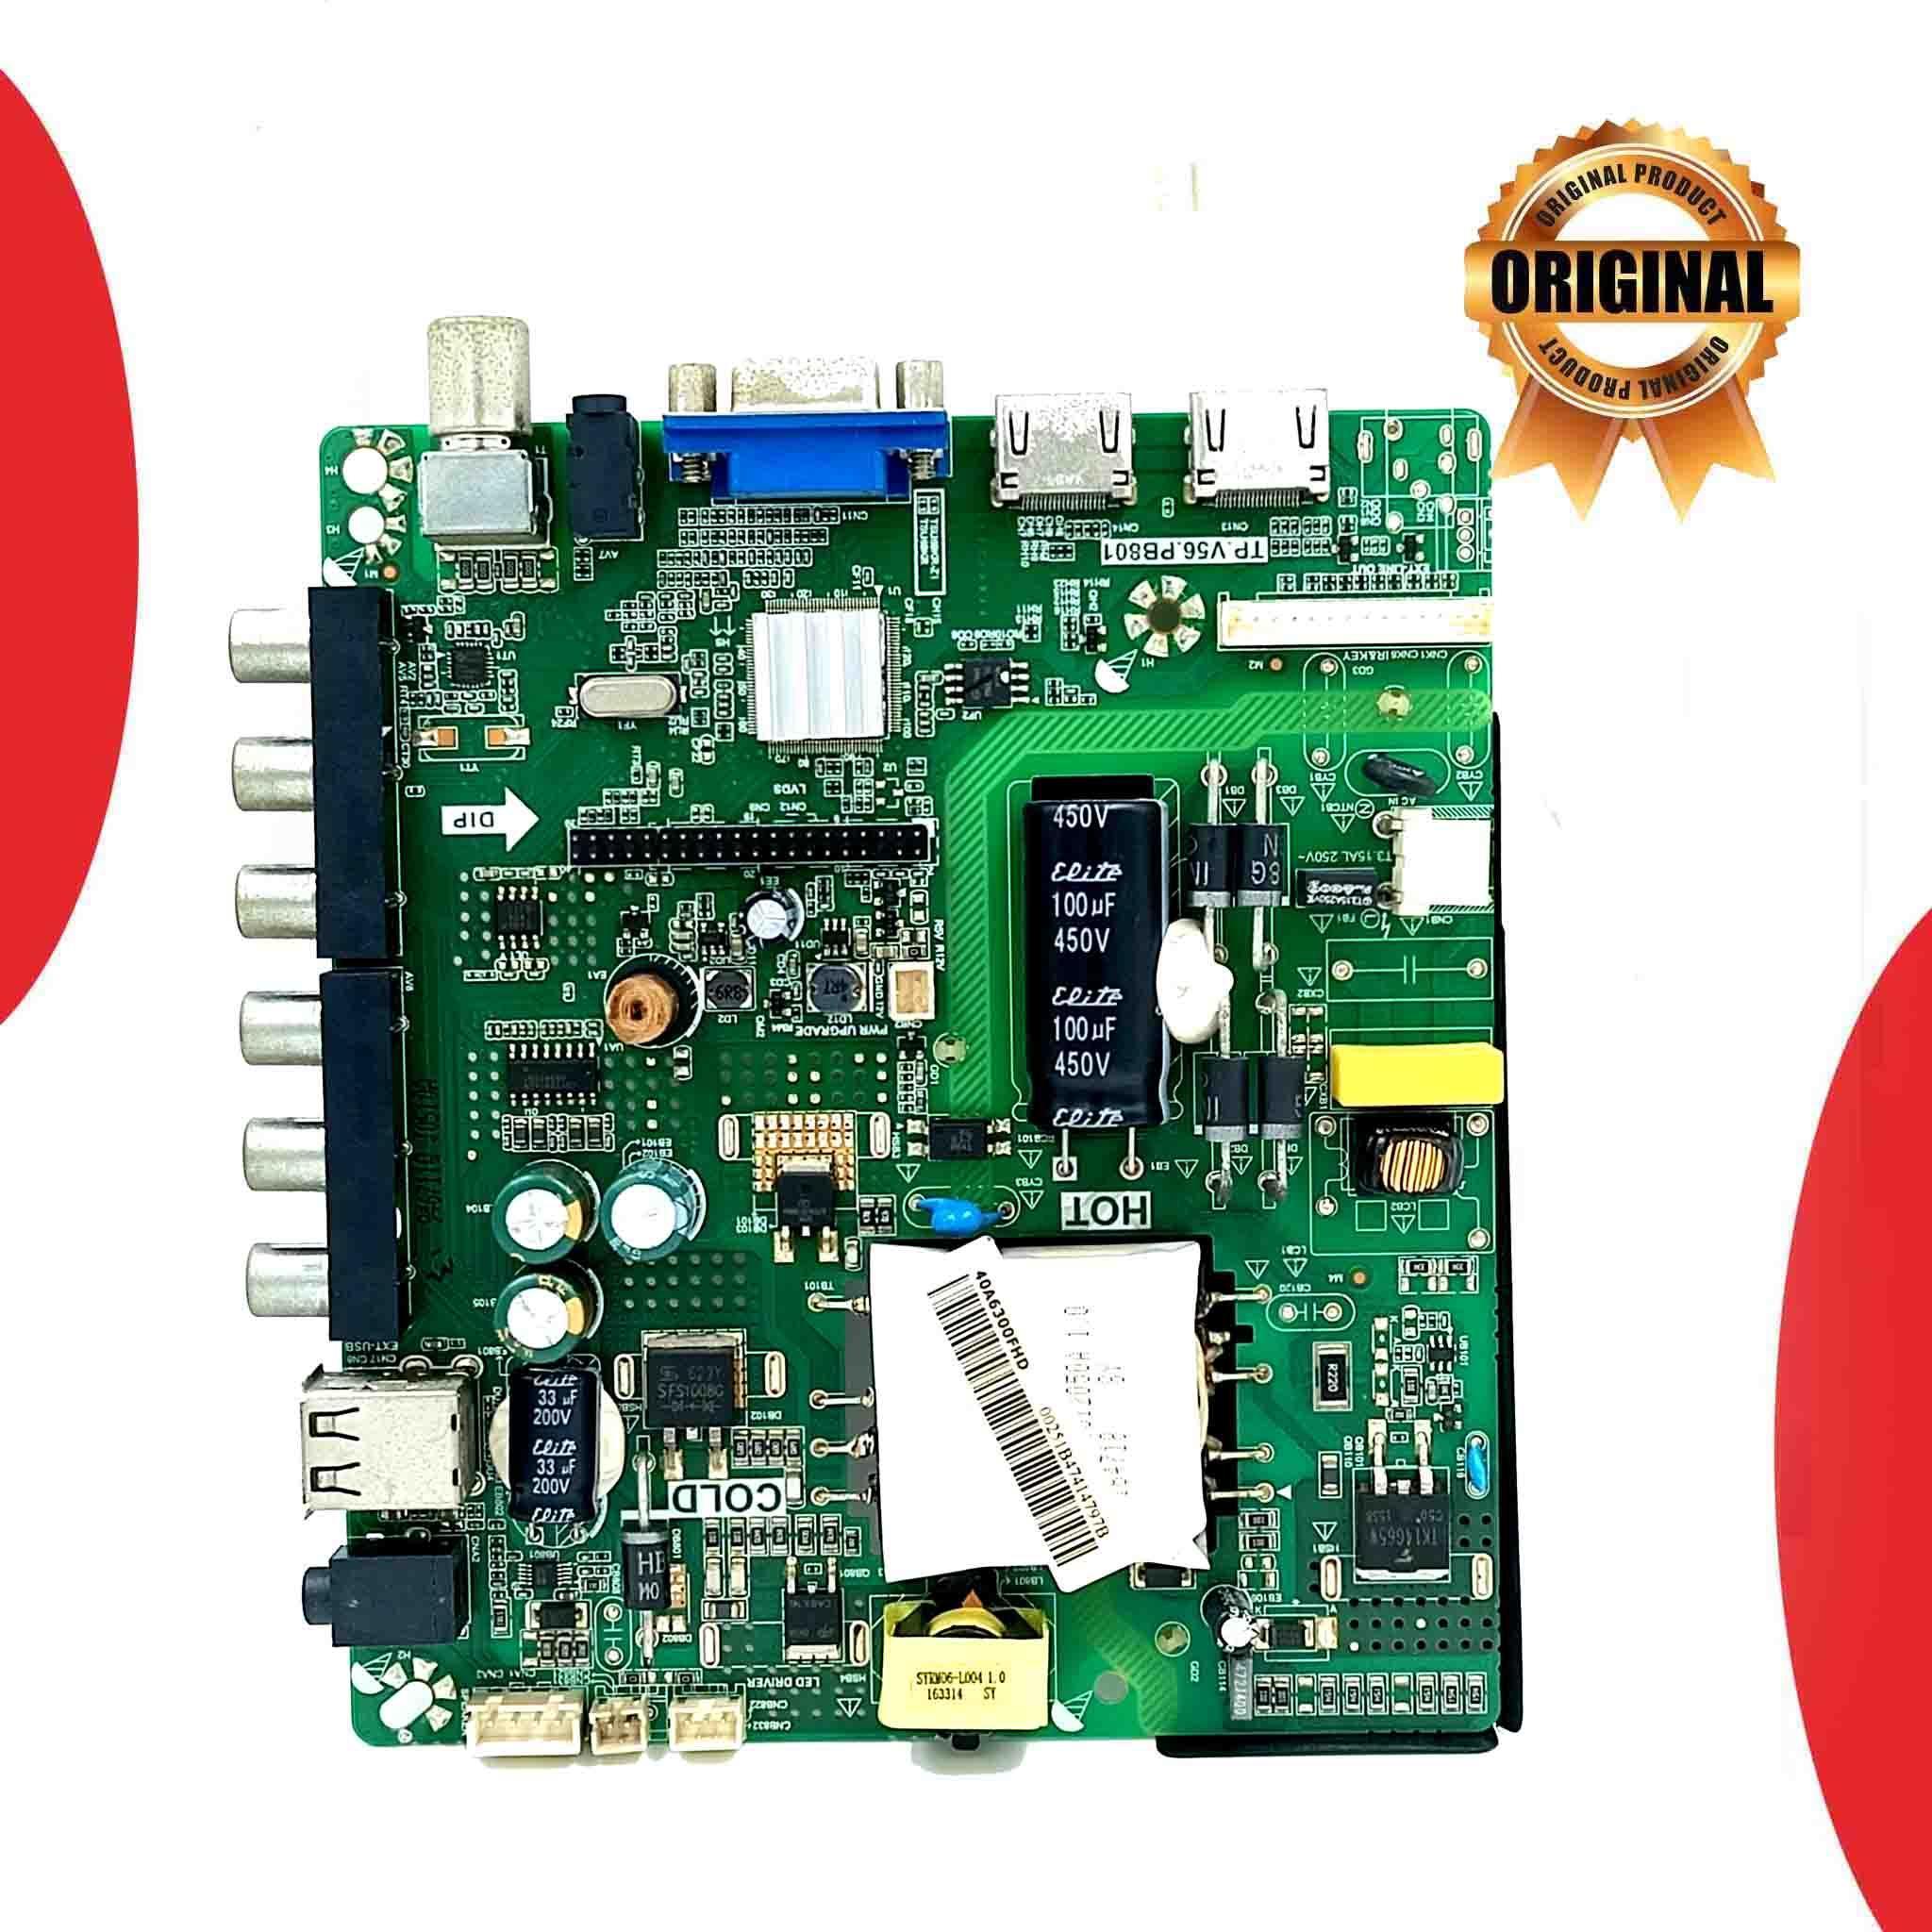 Model 40Z1107HD Micromax LED TV Motherboard - Great Bharat Electronics